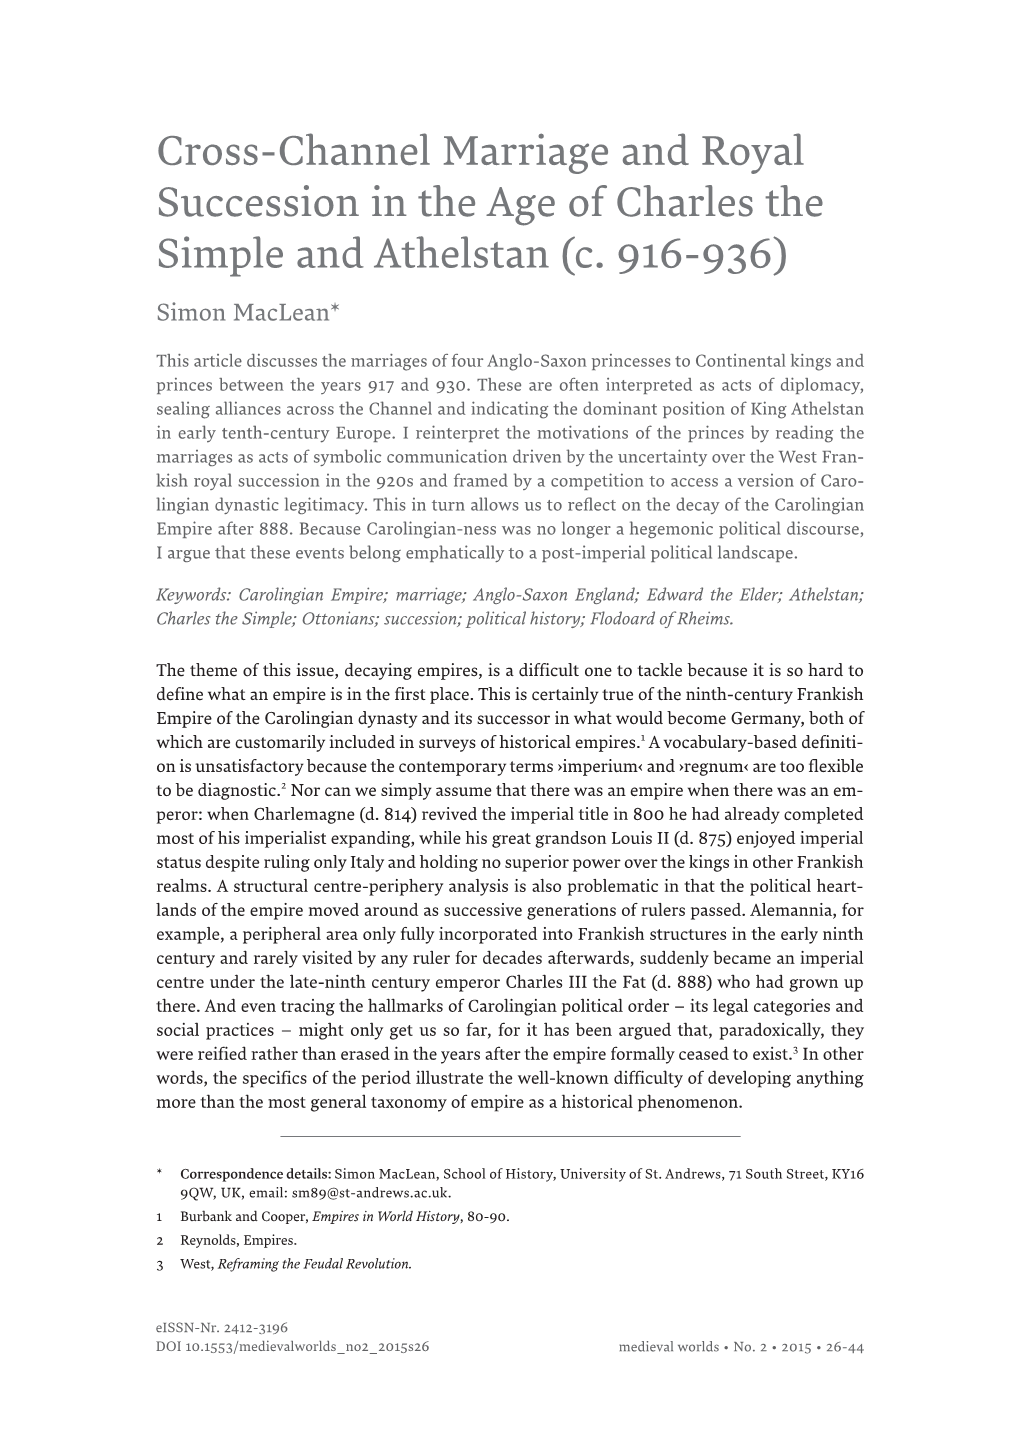 Cross-Channel Marriage and Royal Succession in the Age of Charles the Simple and Athelstan (C